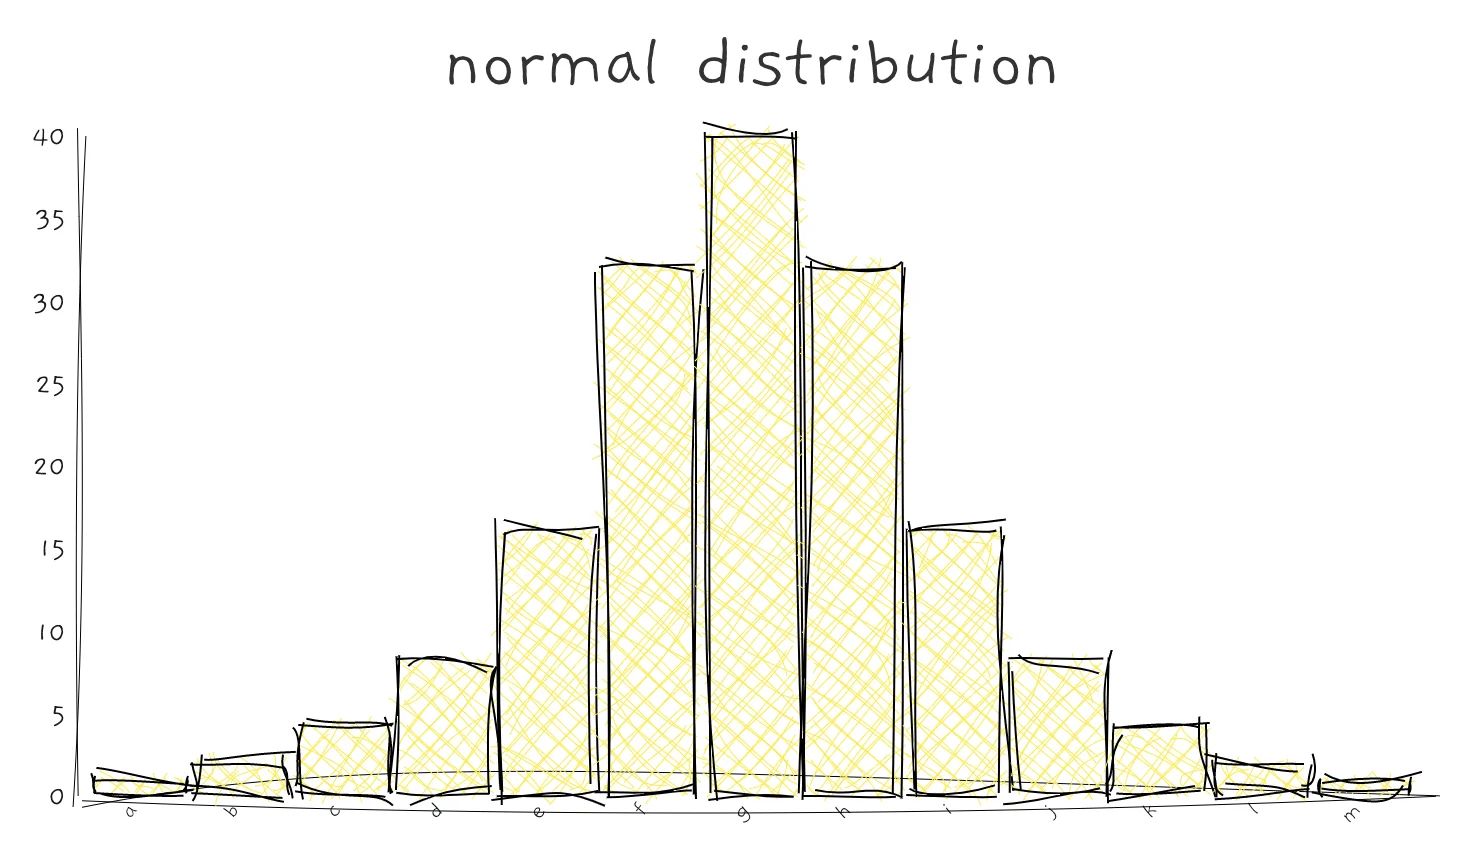 Bar charts are useful for visualising distributions